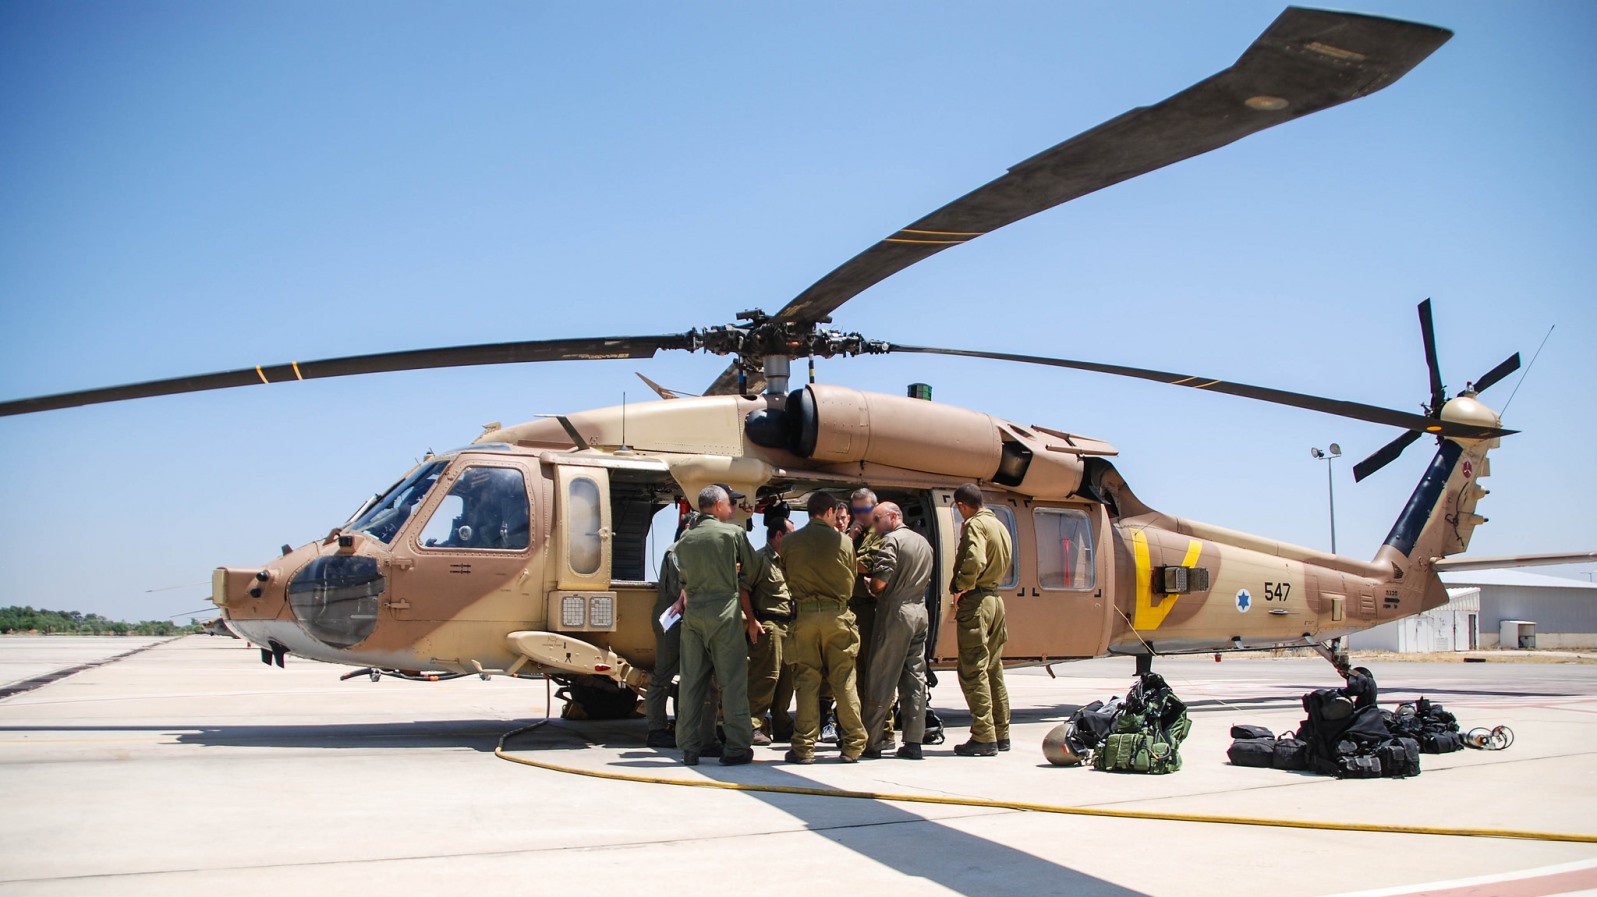 Israel Air Force Unit 669 deployed to Jordan on October 25, 2018, to aid in rescuing flash-flood victims. Photo via https://www.idf.il/en/minisites/unit-669